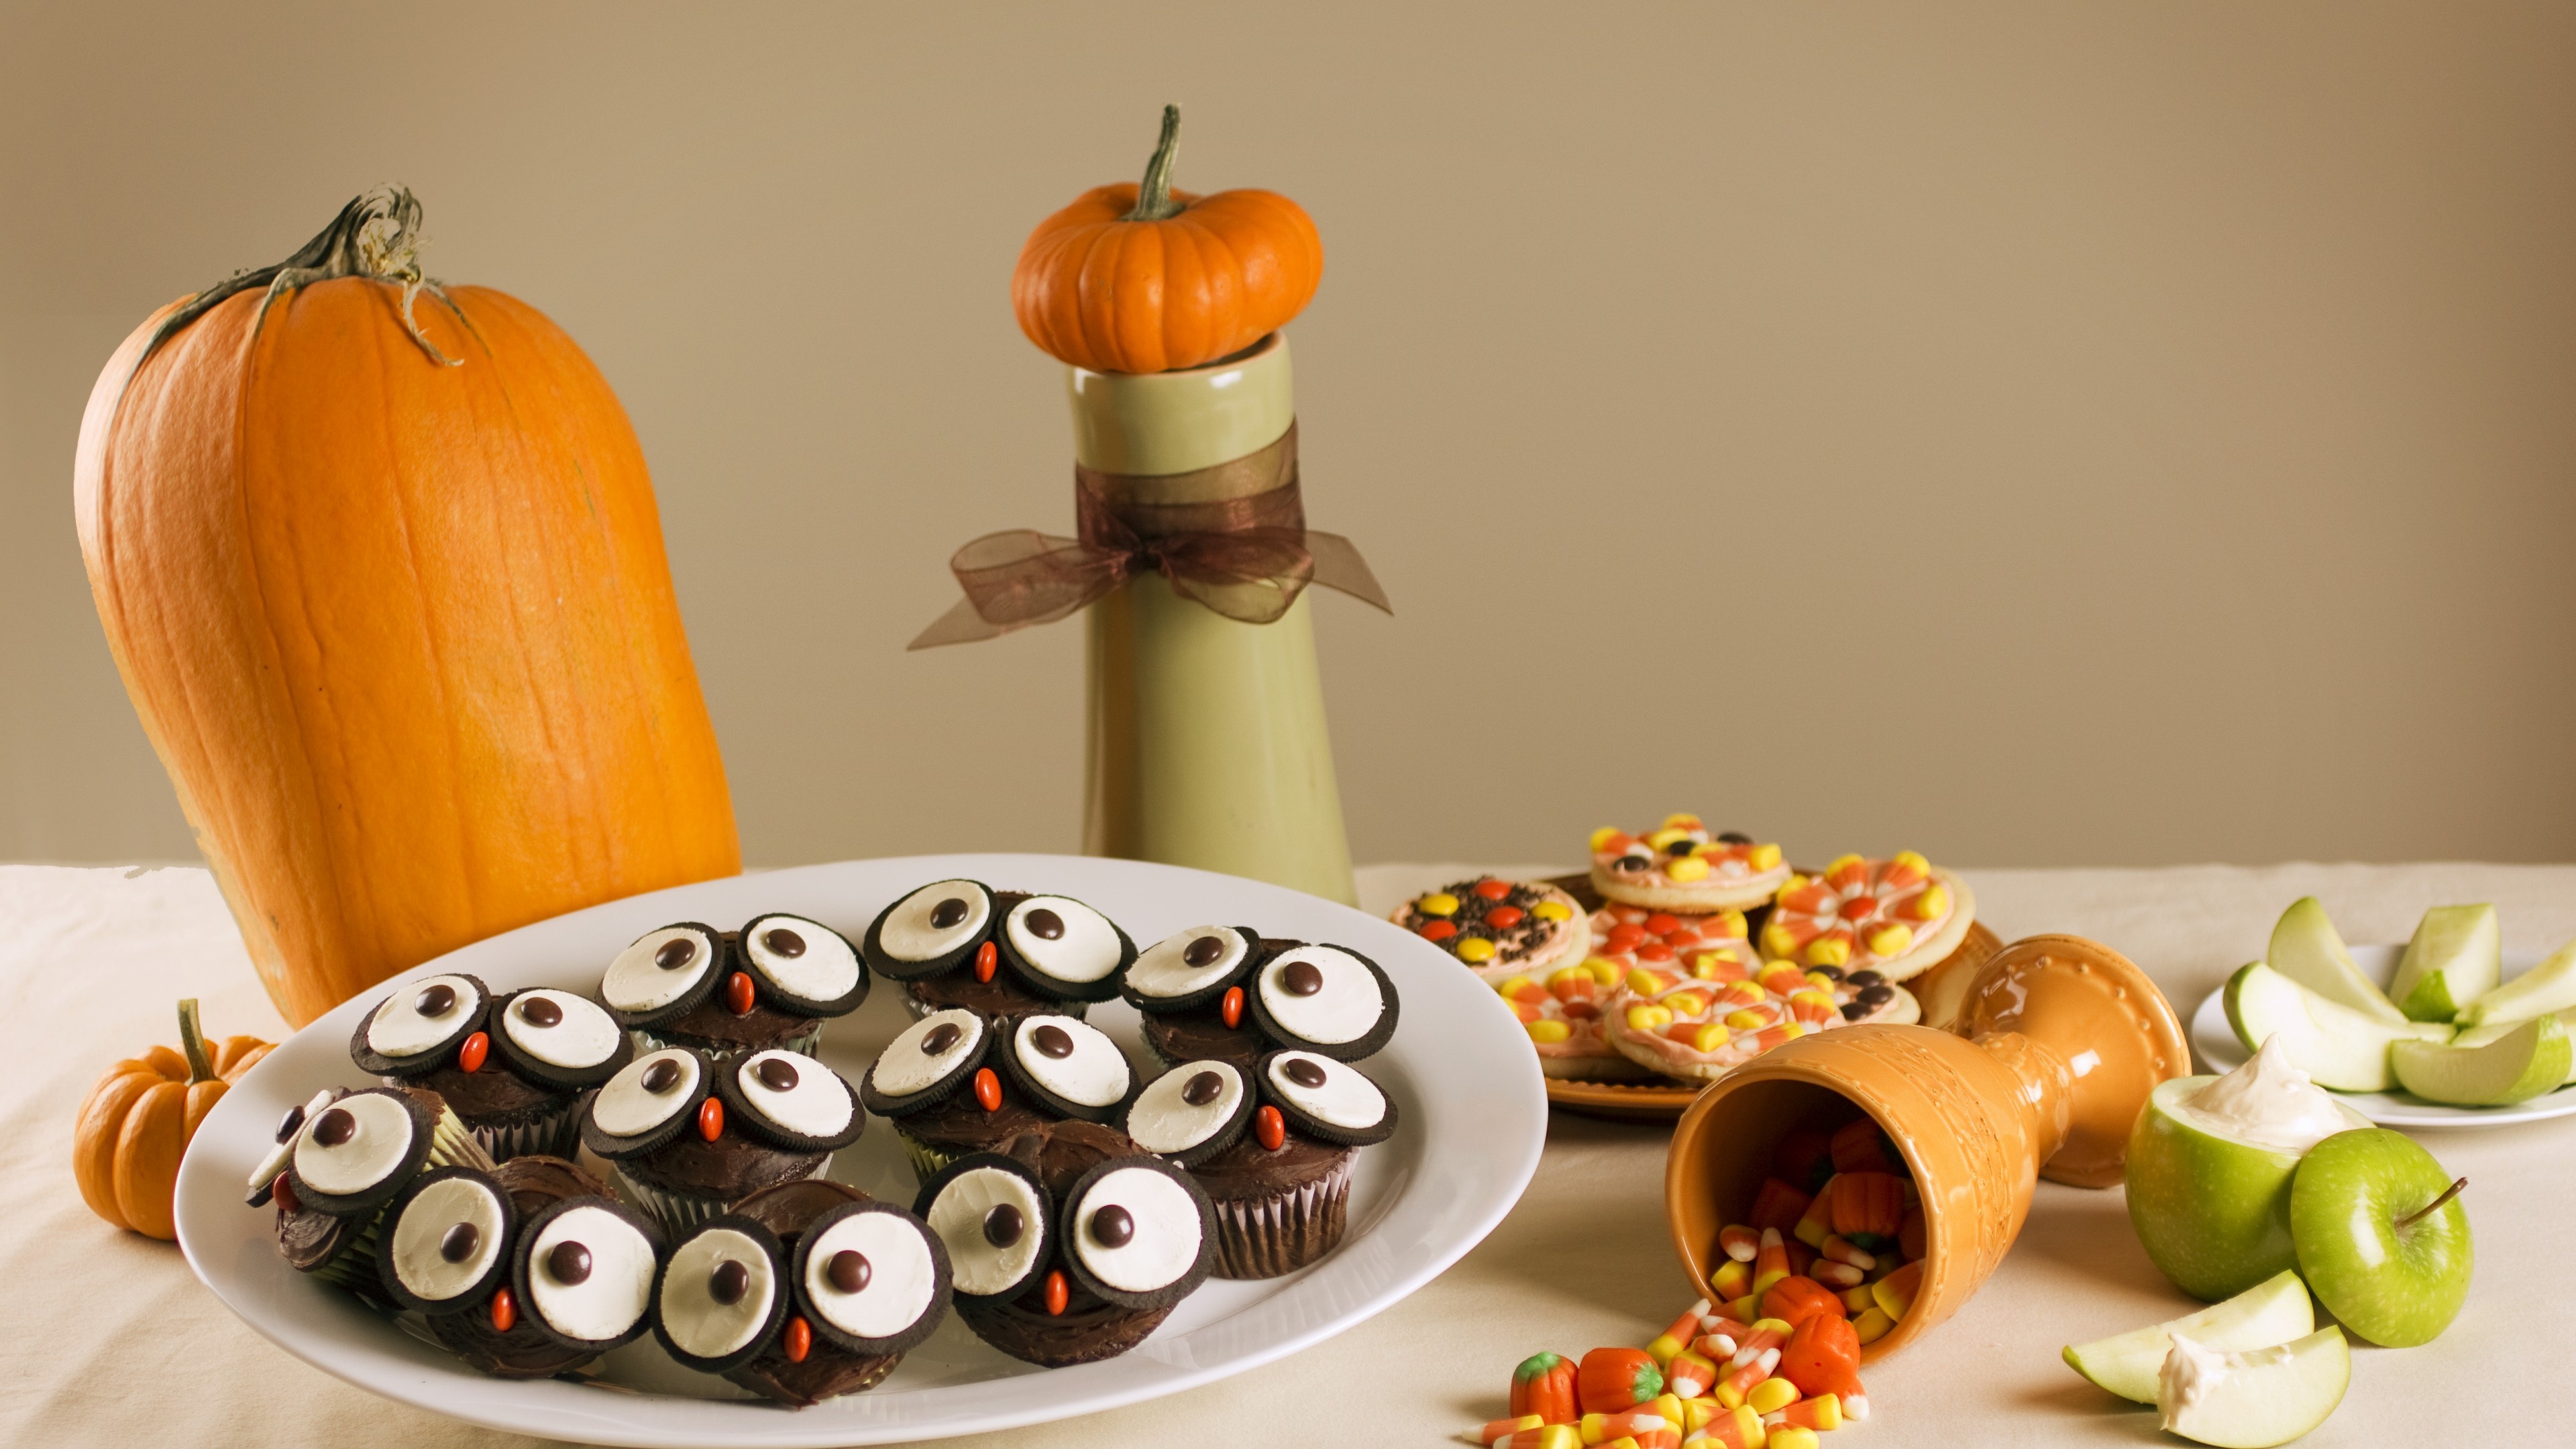 Halloween candy, Holiday table, Muffins and candy, Pumpkin decor, 3840x2160 4K Desktop